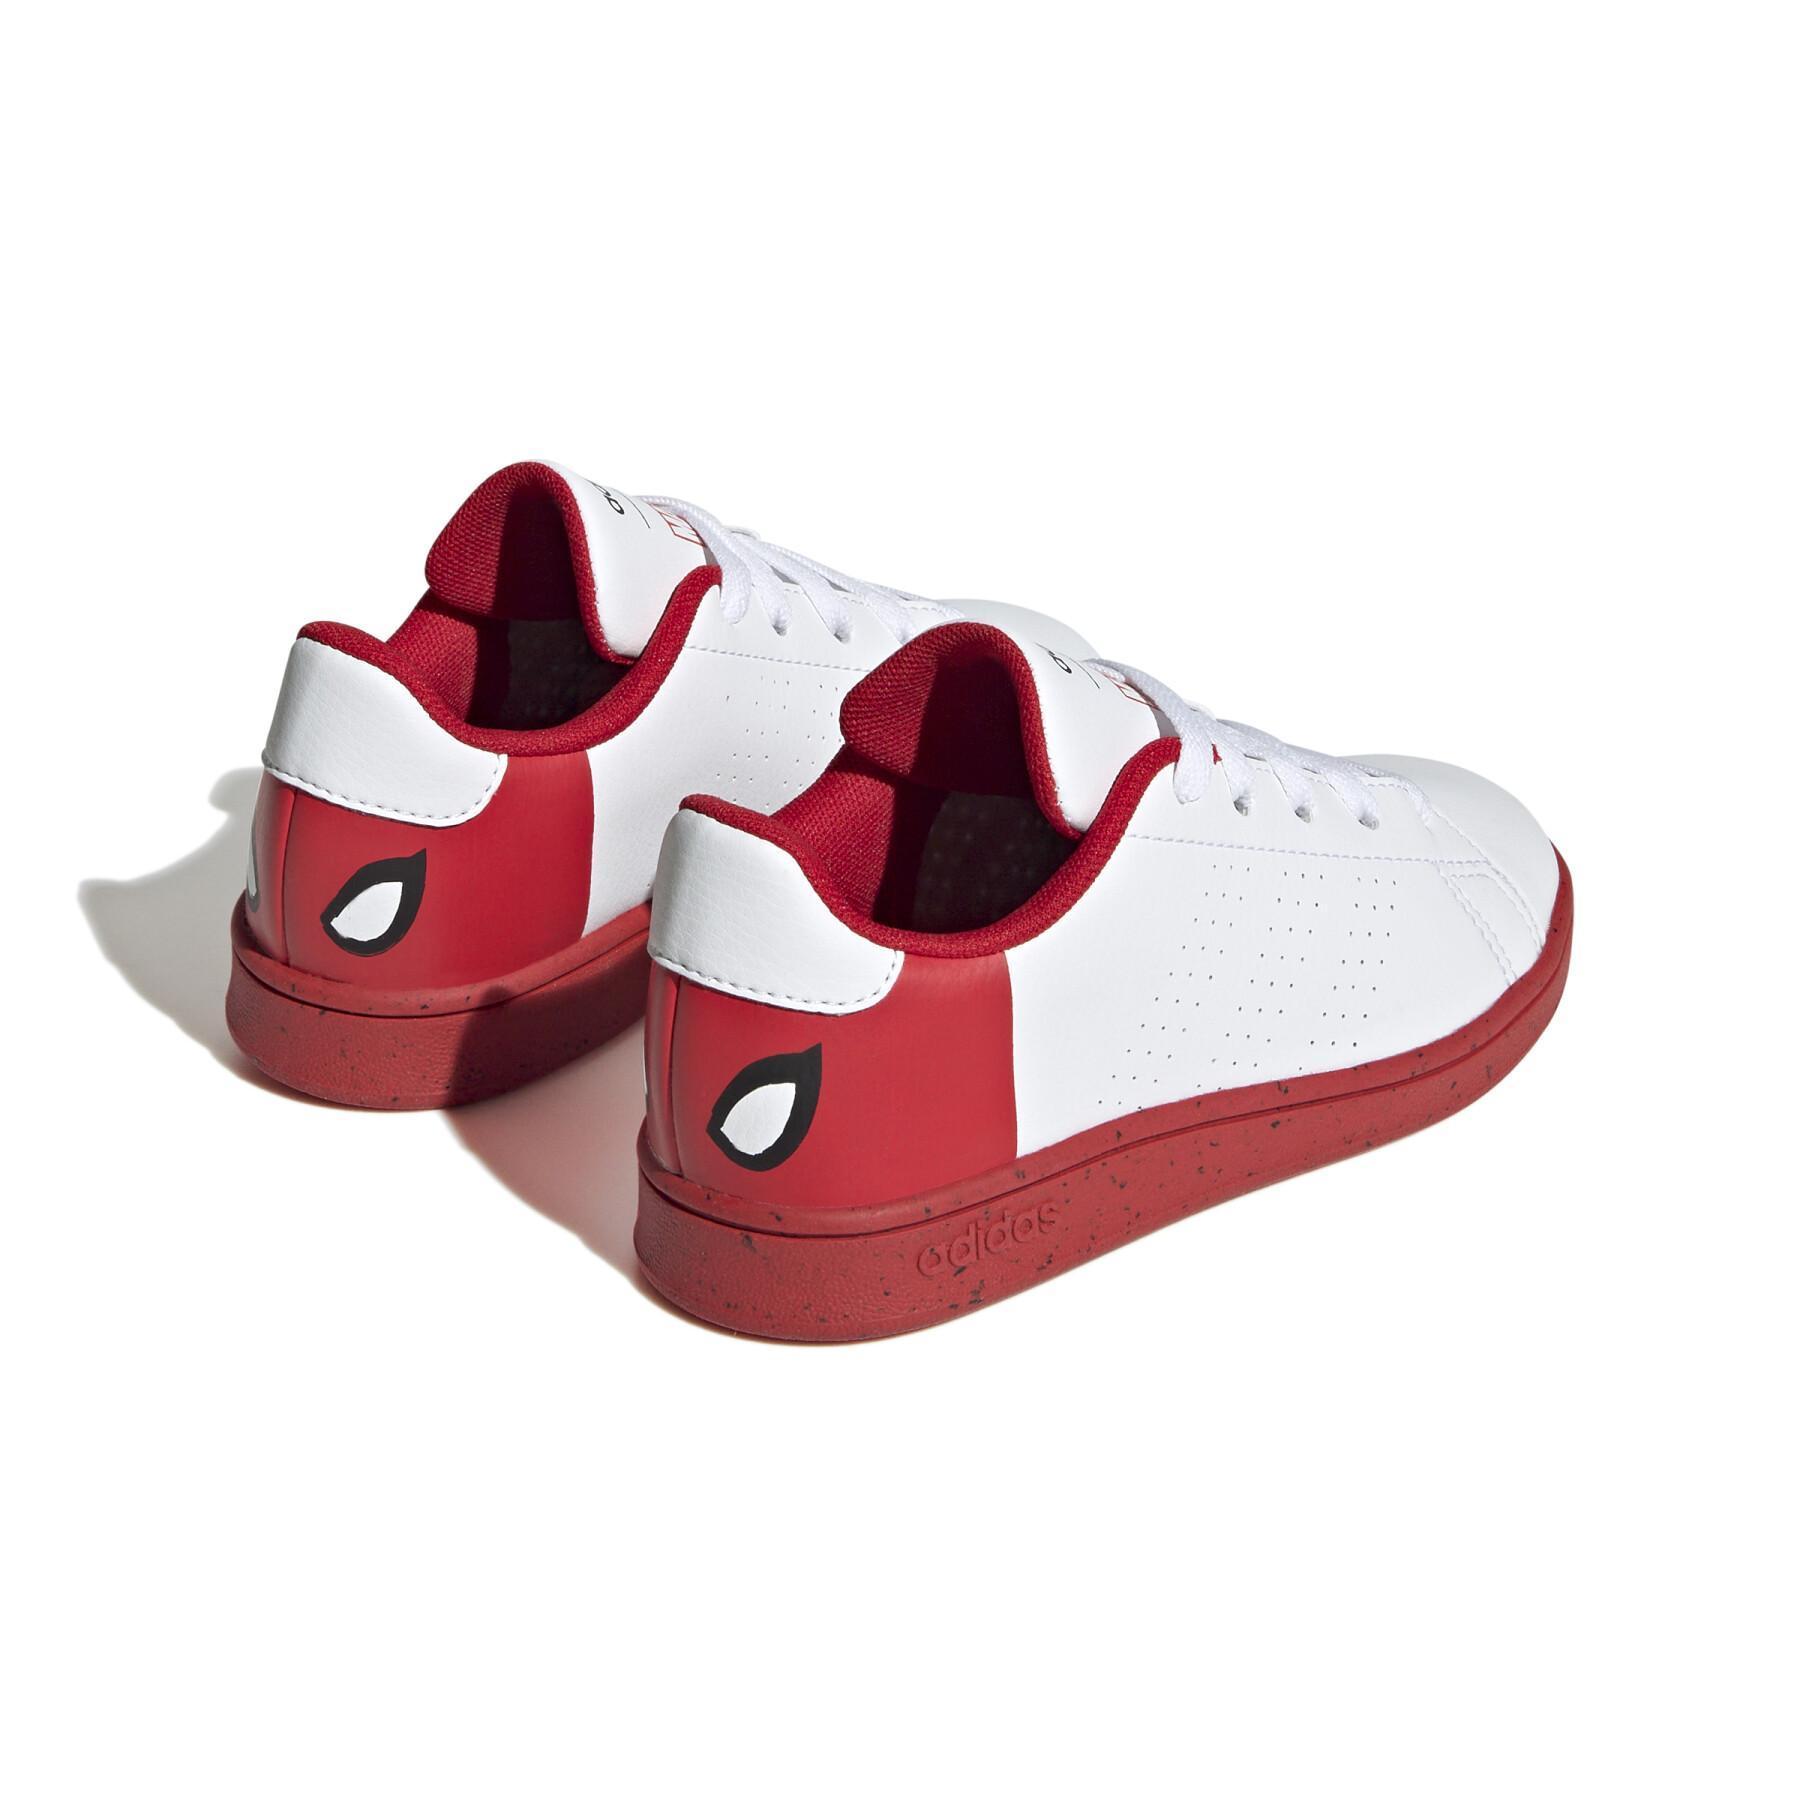 Children's lace-up sneakers adidas X Marvel Advantage Spider-Man